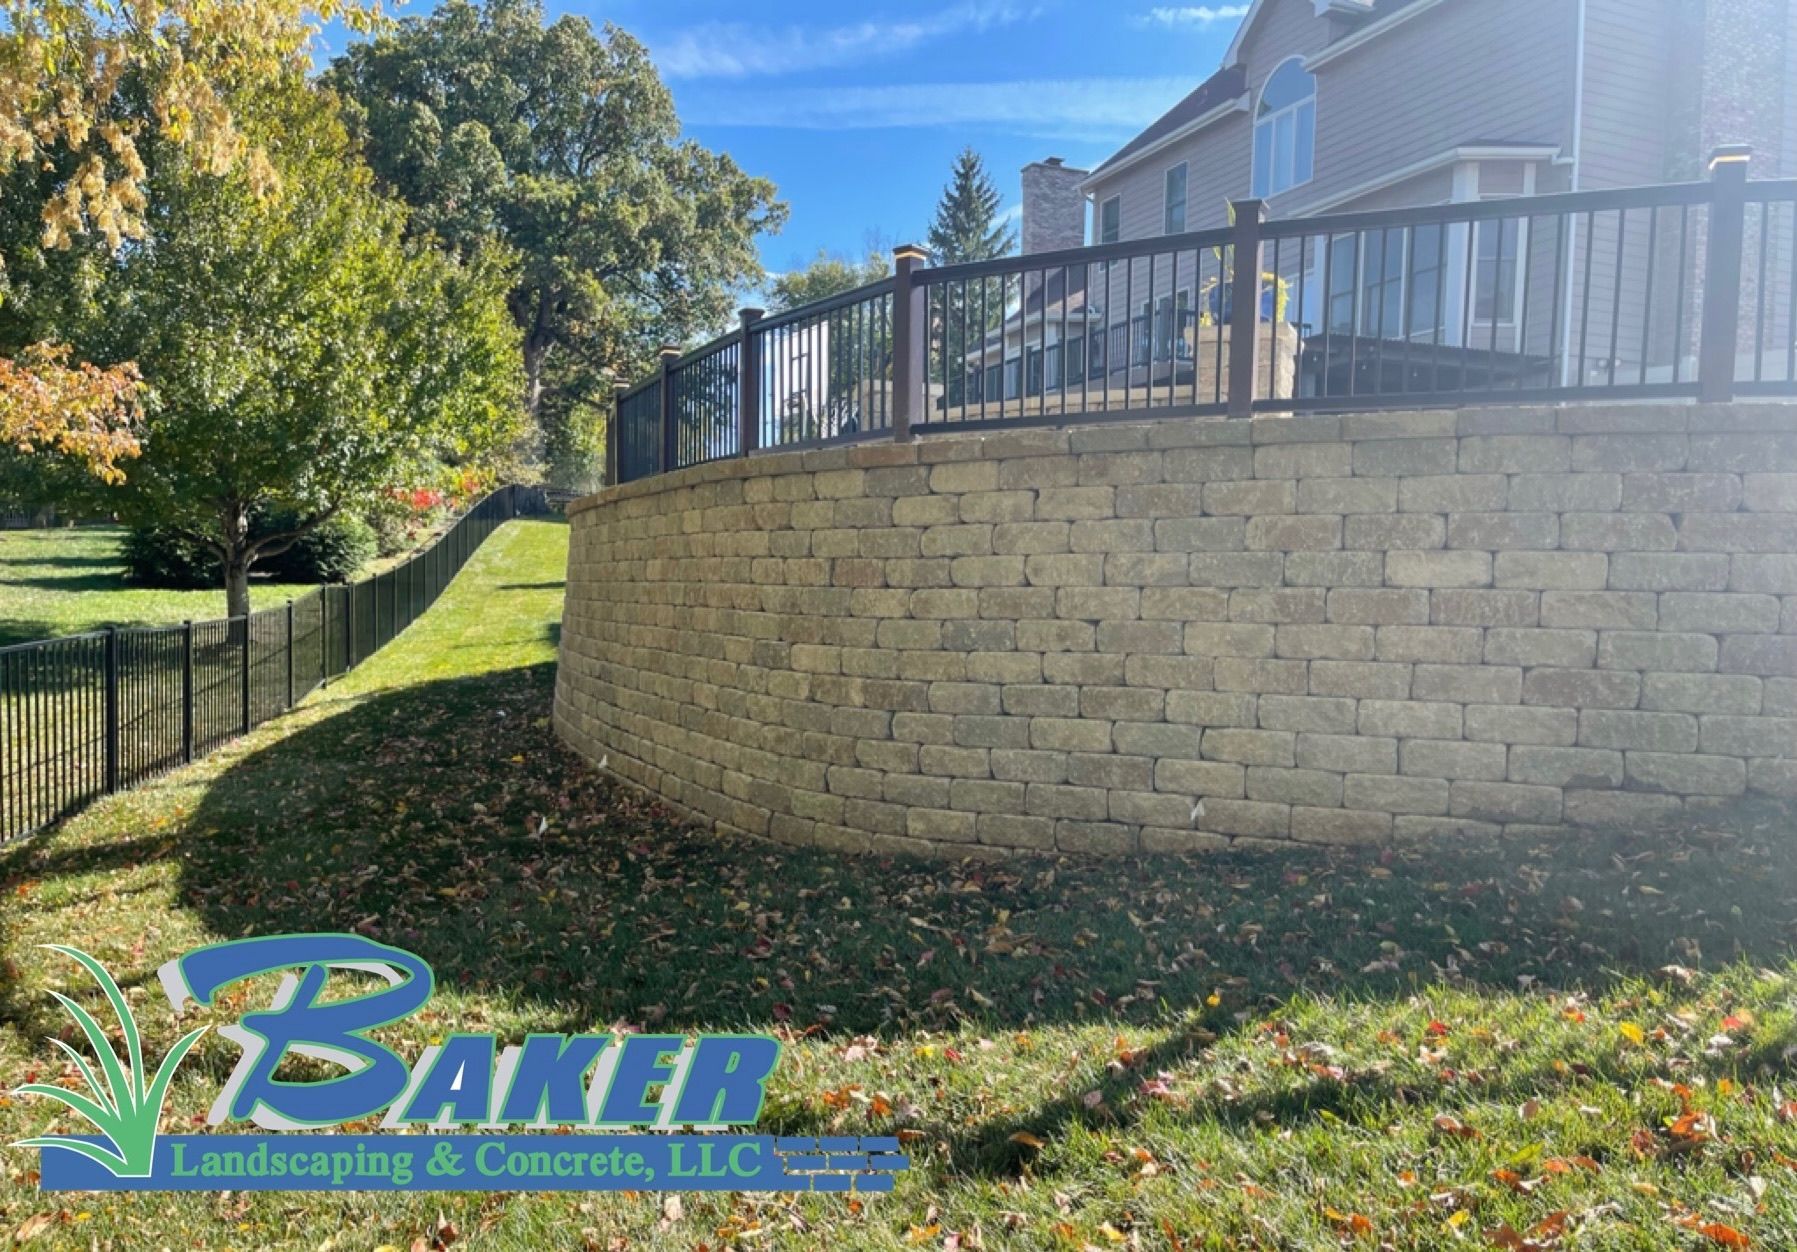 New 8’ Retaining Wall With Pool Code Fence, New Swimming Pool & Patio,  Chesterfield, MO.